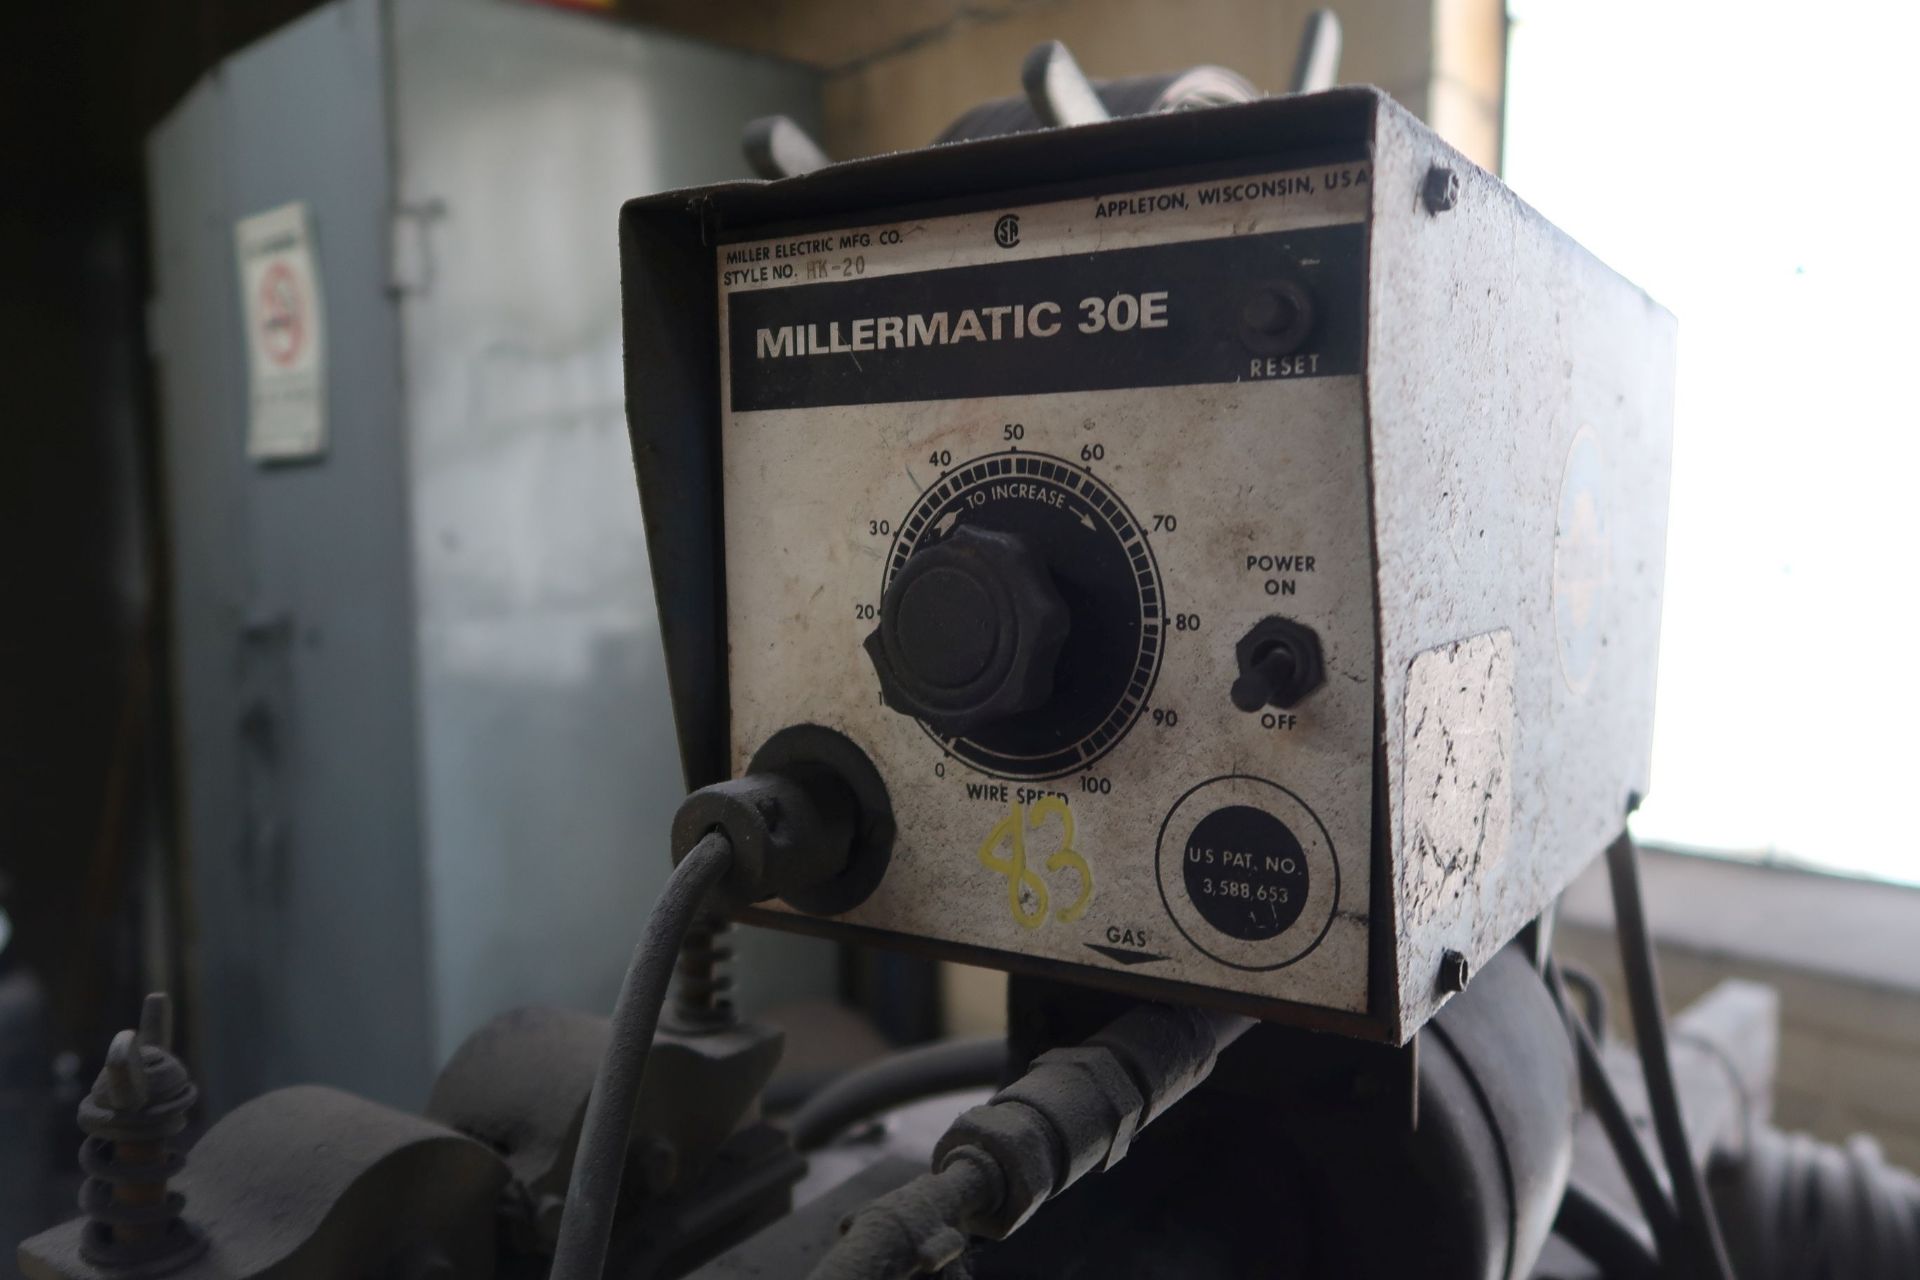 650 AMP MILLER MP-65E WELDER; S/N HE806924, WITH MILLERMATIC 30E WIRE FEED - Image 3 of 3